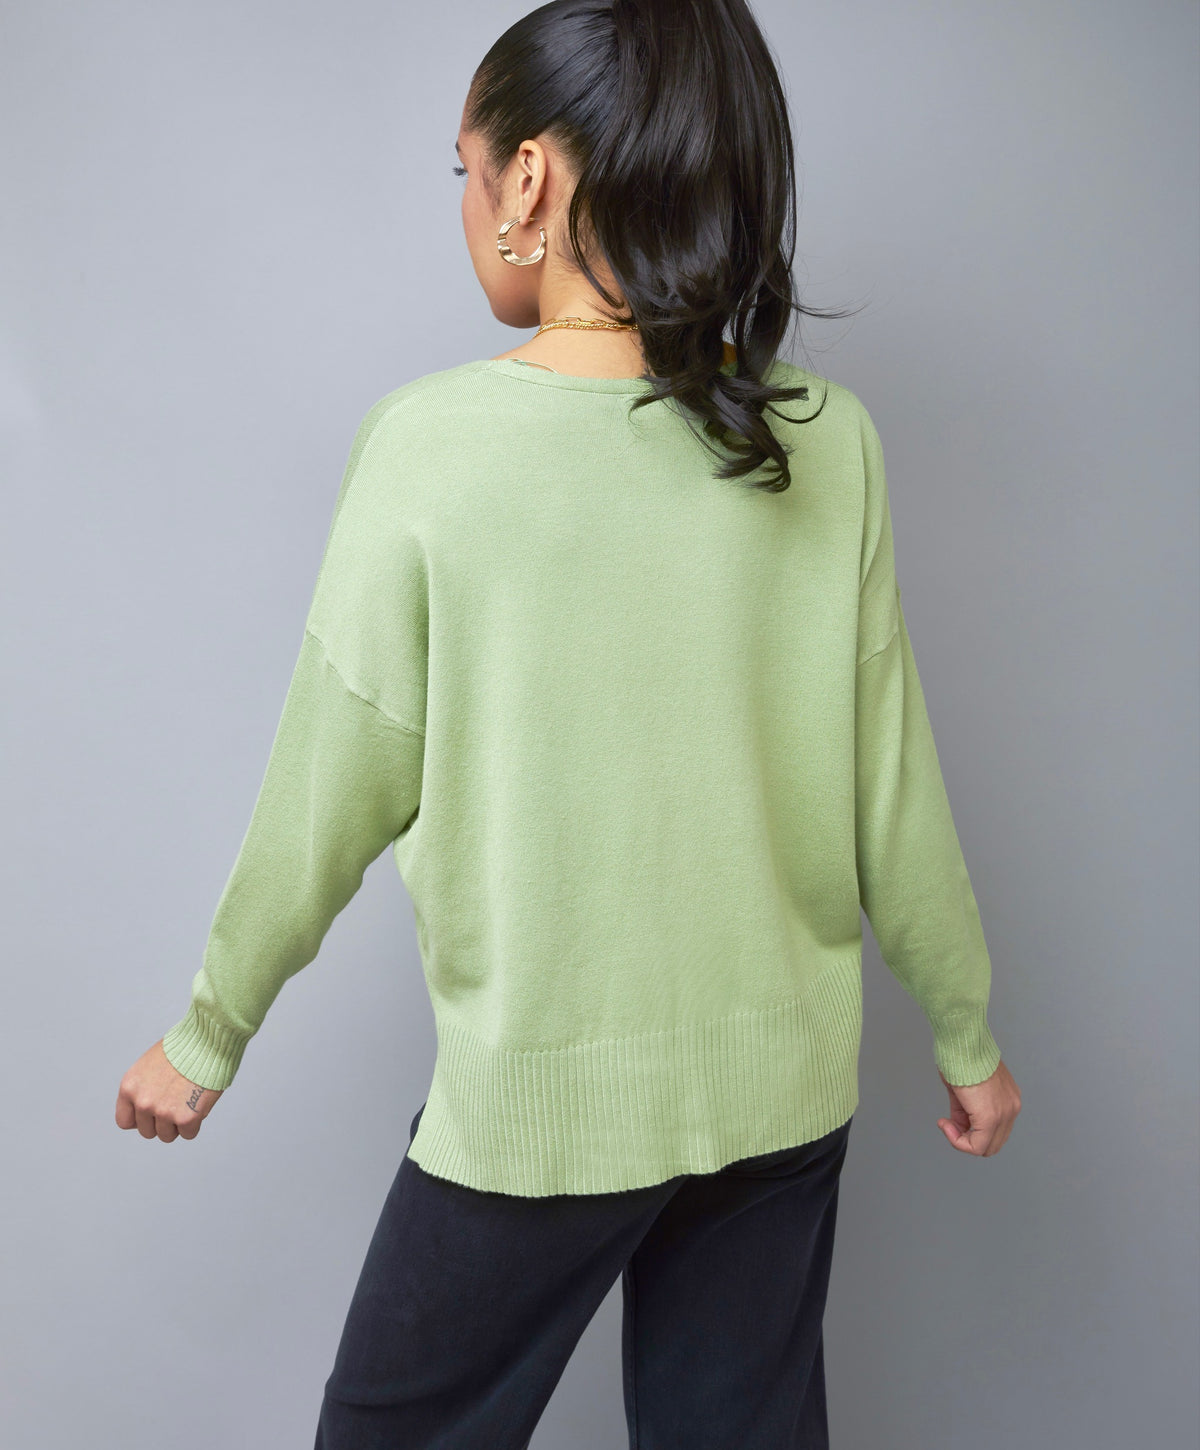 Easygoing Basic Apple Green V-Neck Knit Sweater Top